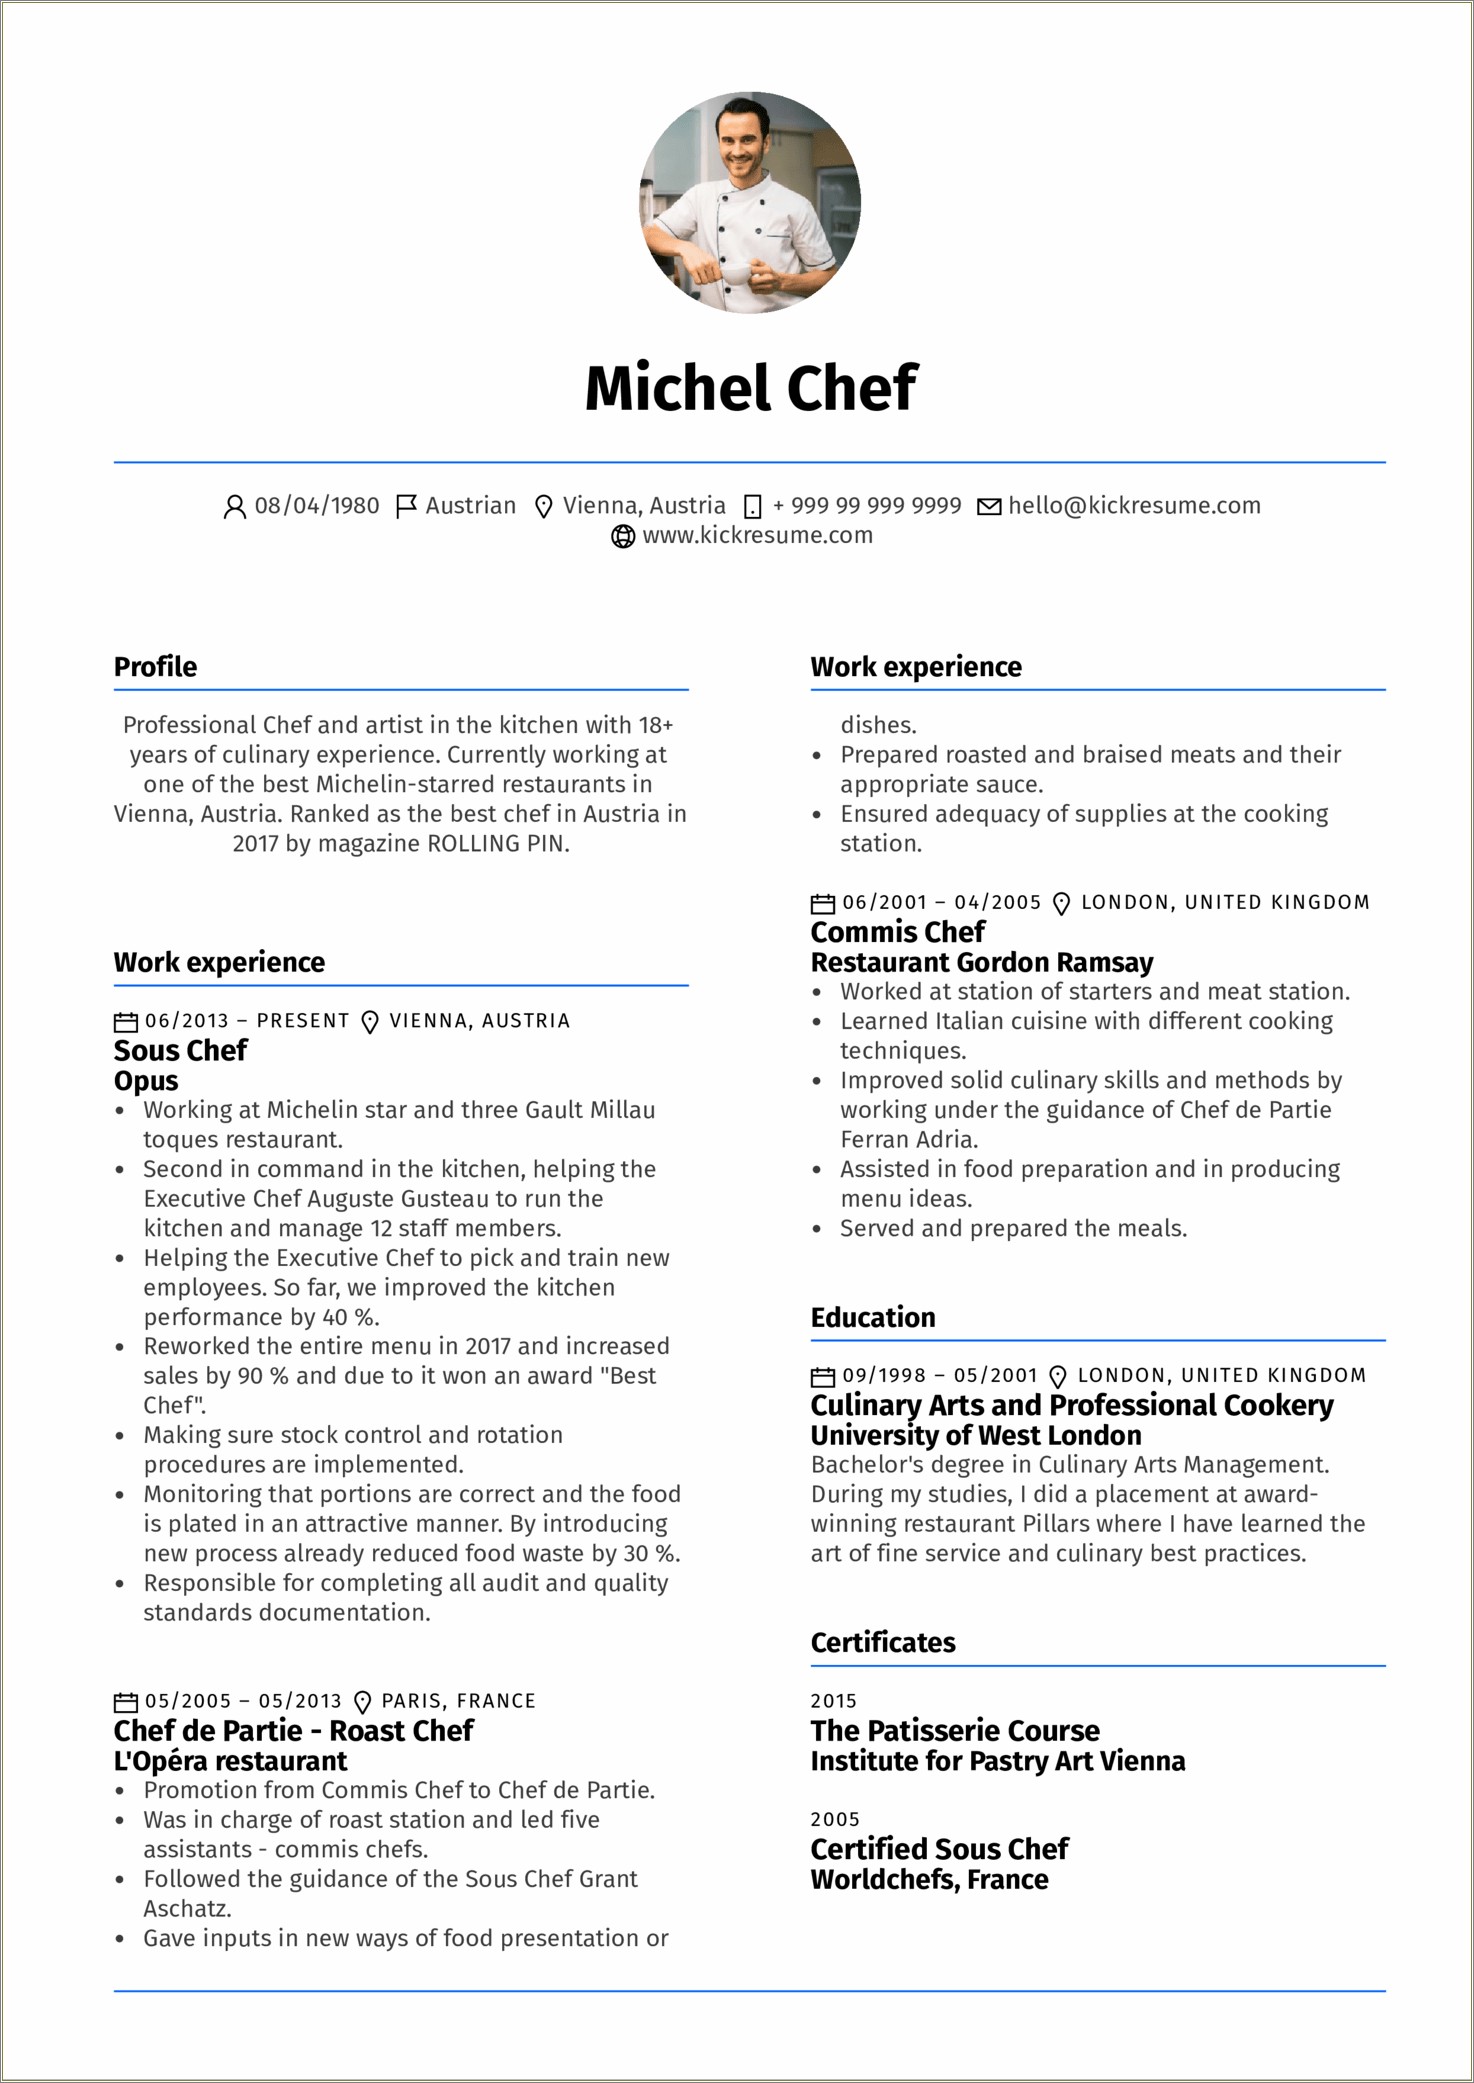 Resume Objective About A Cooking Job